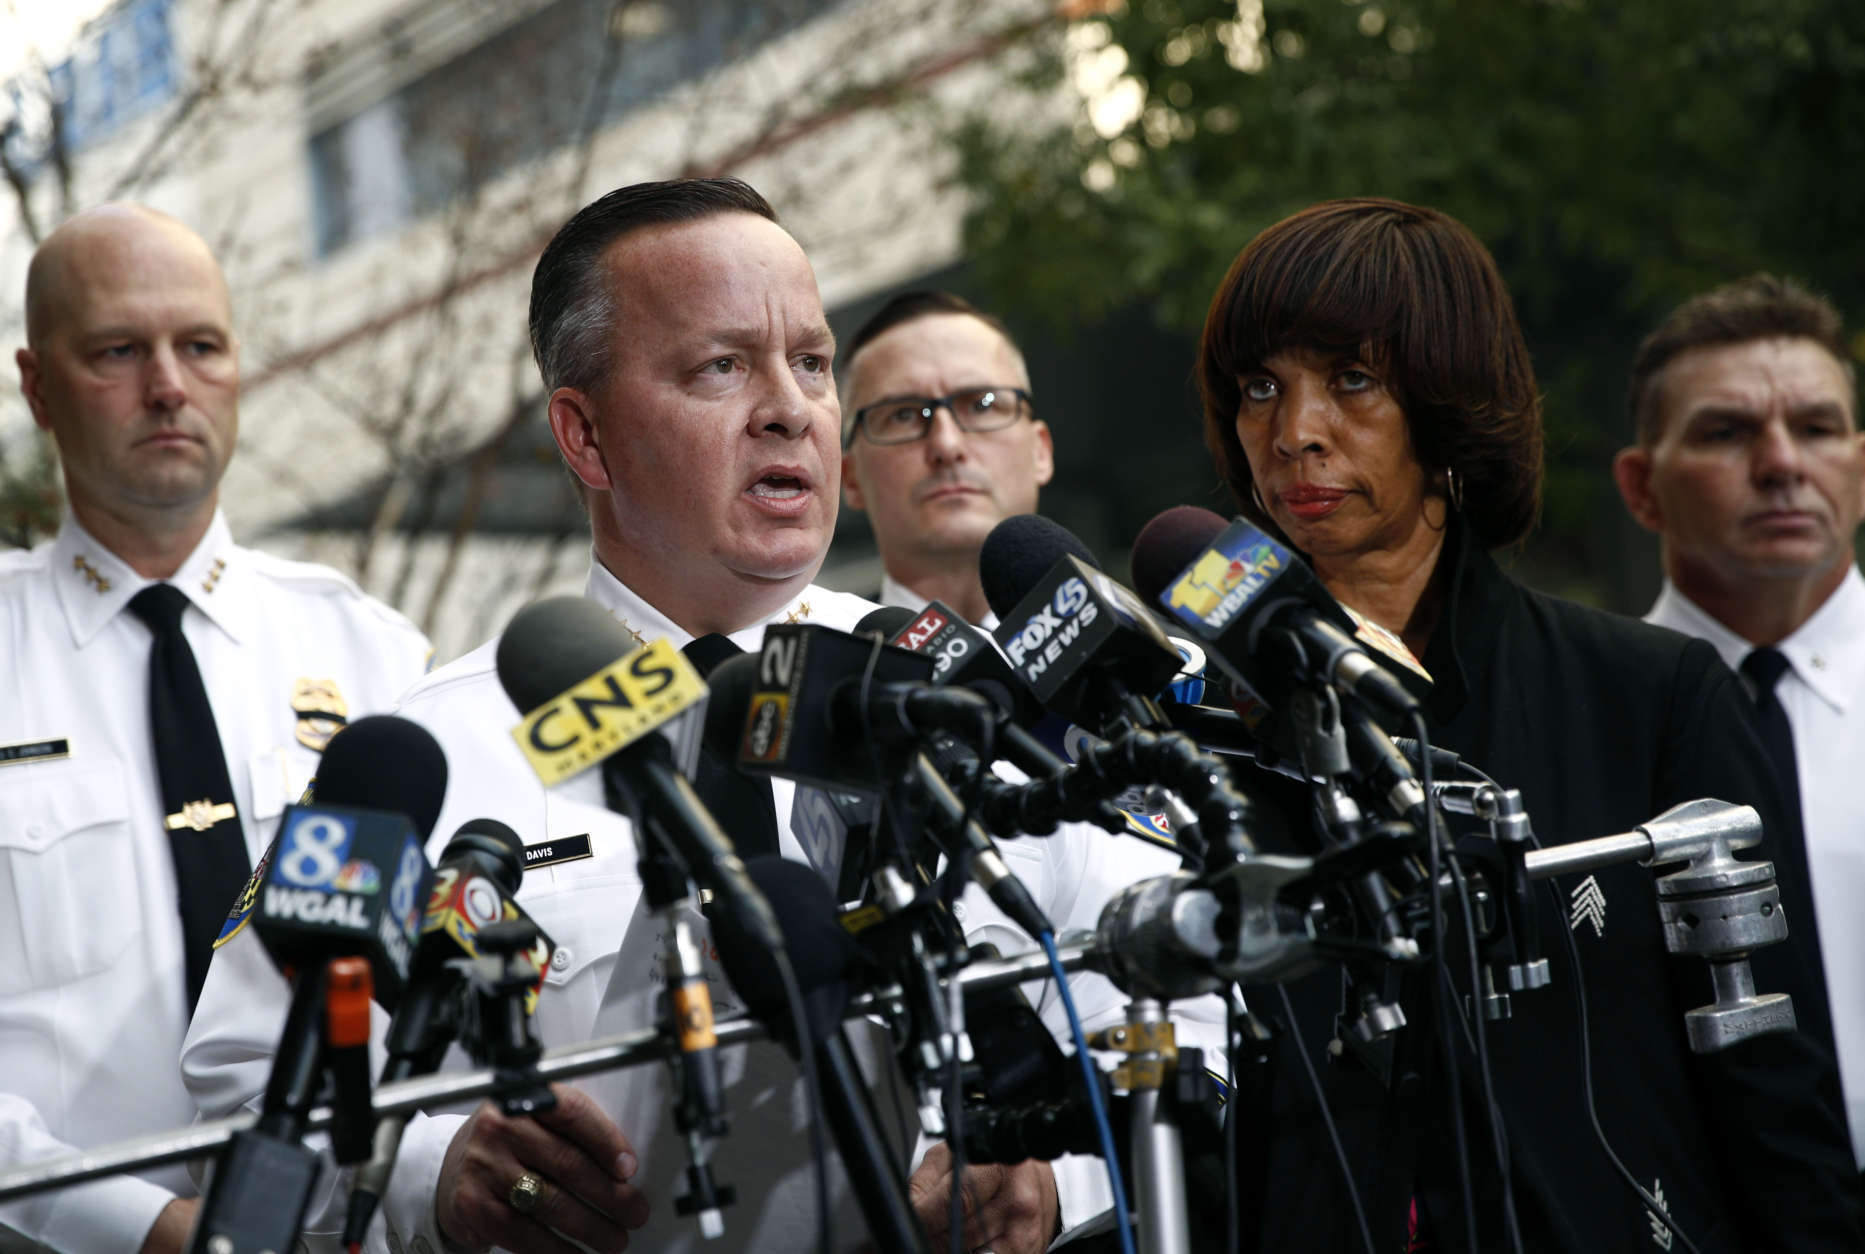 Baltimore Police Department Commissioner Kevin Davis, left, speaks alongside Mayor Catherine Pugh at a news conference outside the R Adams Cowley Shock Trauma Center in Baltimore, Thursday, Nov. 16, 2017, to announce the death of Det. Sean Suiter. Suiter was shot in the head Wednesday while working in a troubled area of the city grappling with high crime rates. (AP Photo/Patrick Semansky)